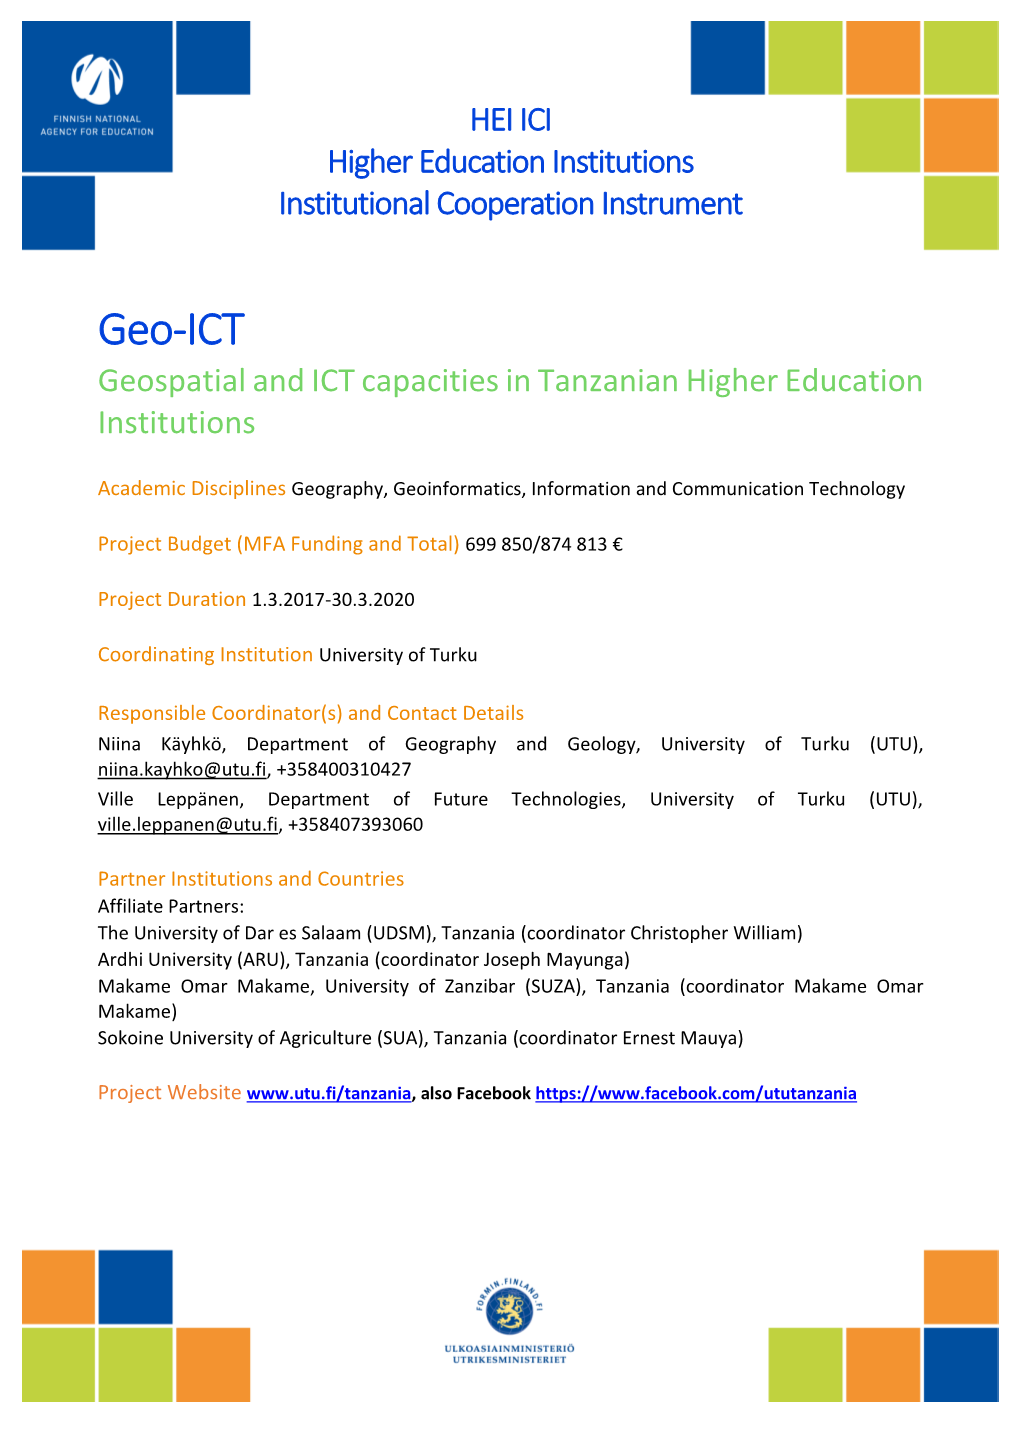 Geo-ICT Geospatial and ICT Capacities in Tanzanian Higher Education Institutions